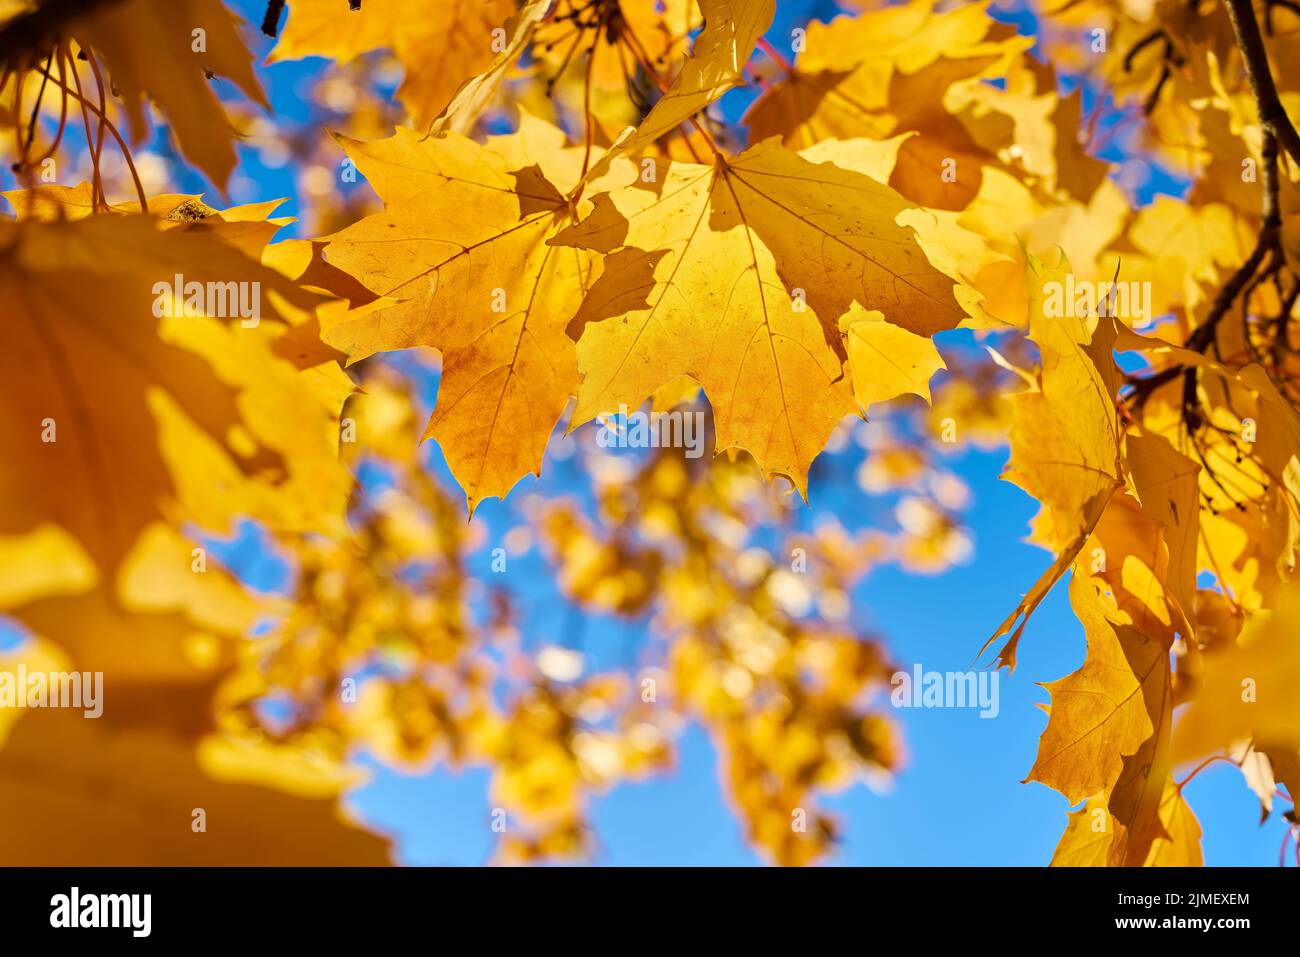 Leaves of a Norway maple (Acer platanoides) with autumn yellow coloration in the back light Stock Photo